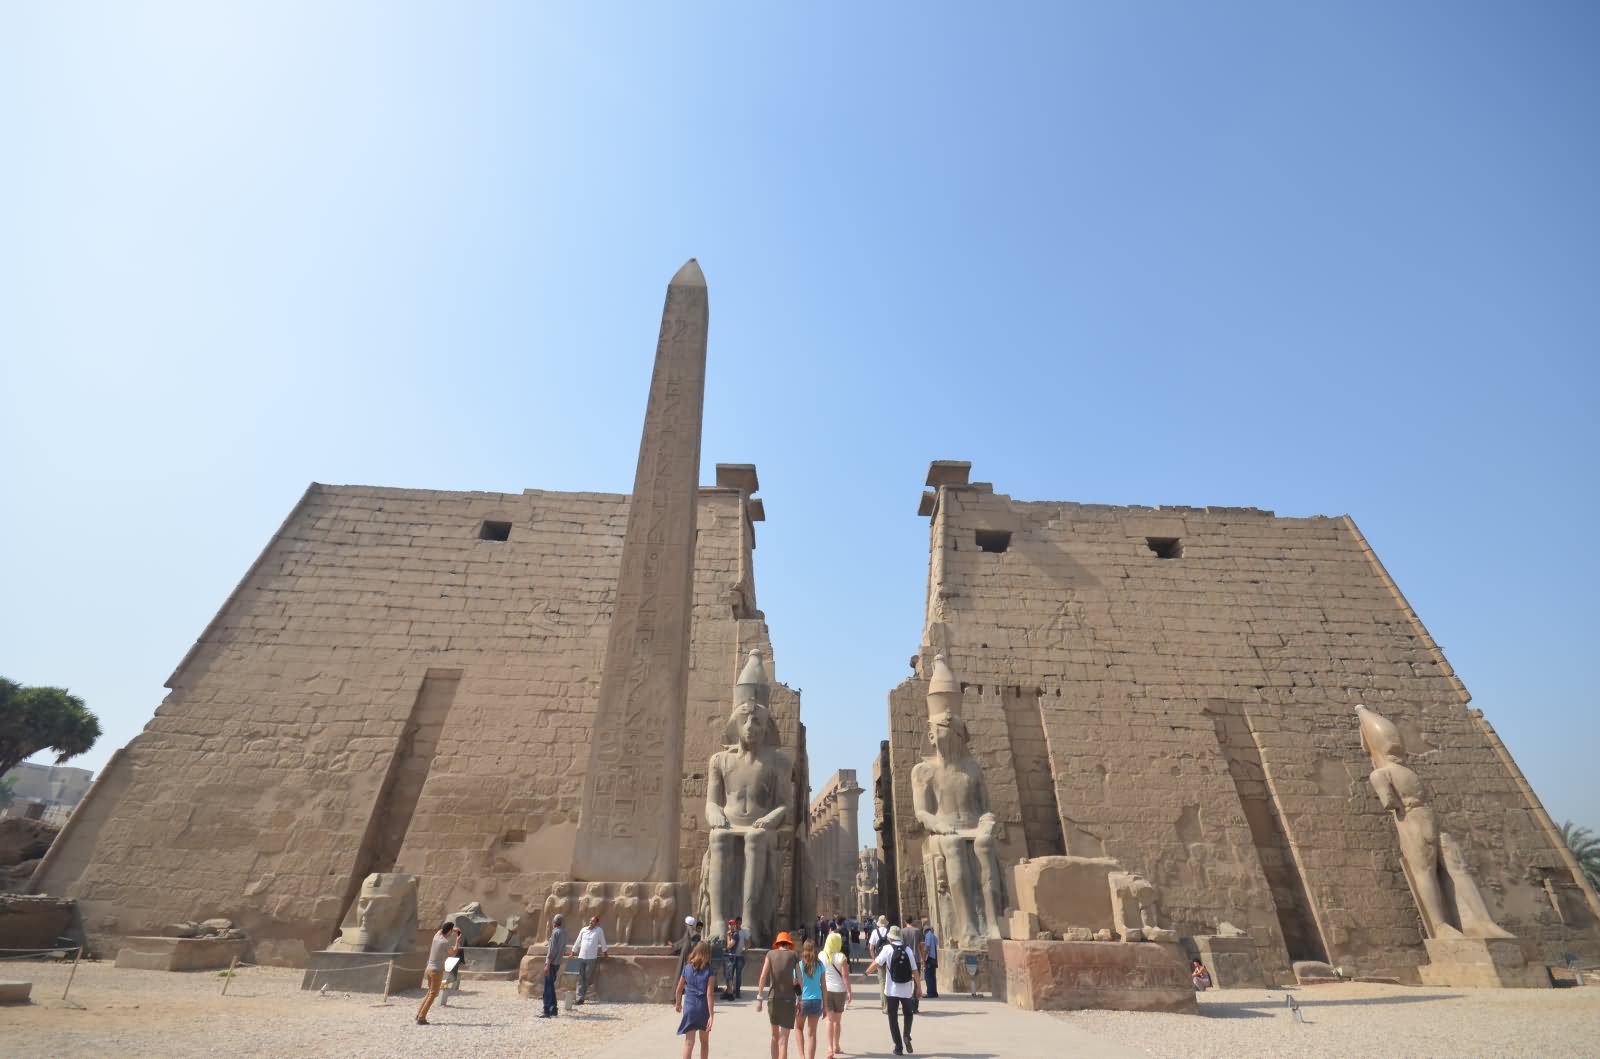 Entrance Of Luxor Temple In Egypt